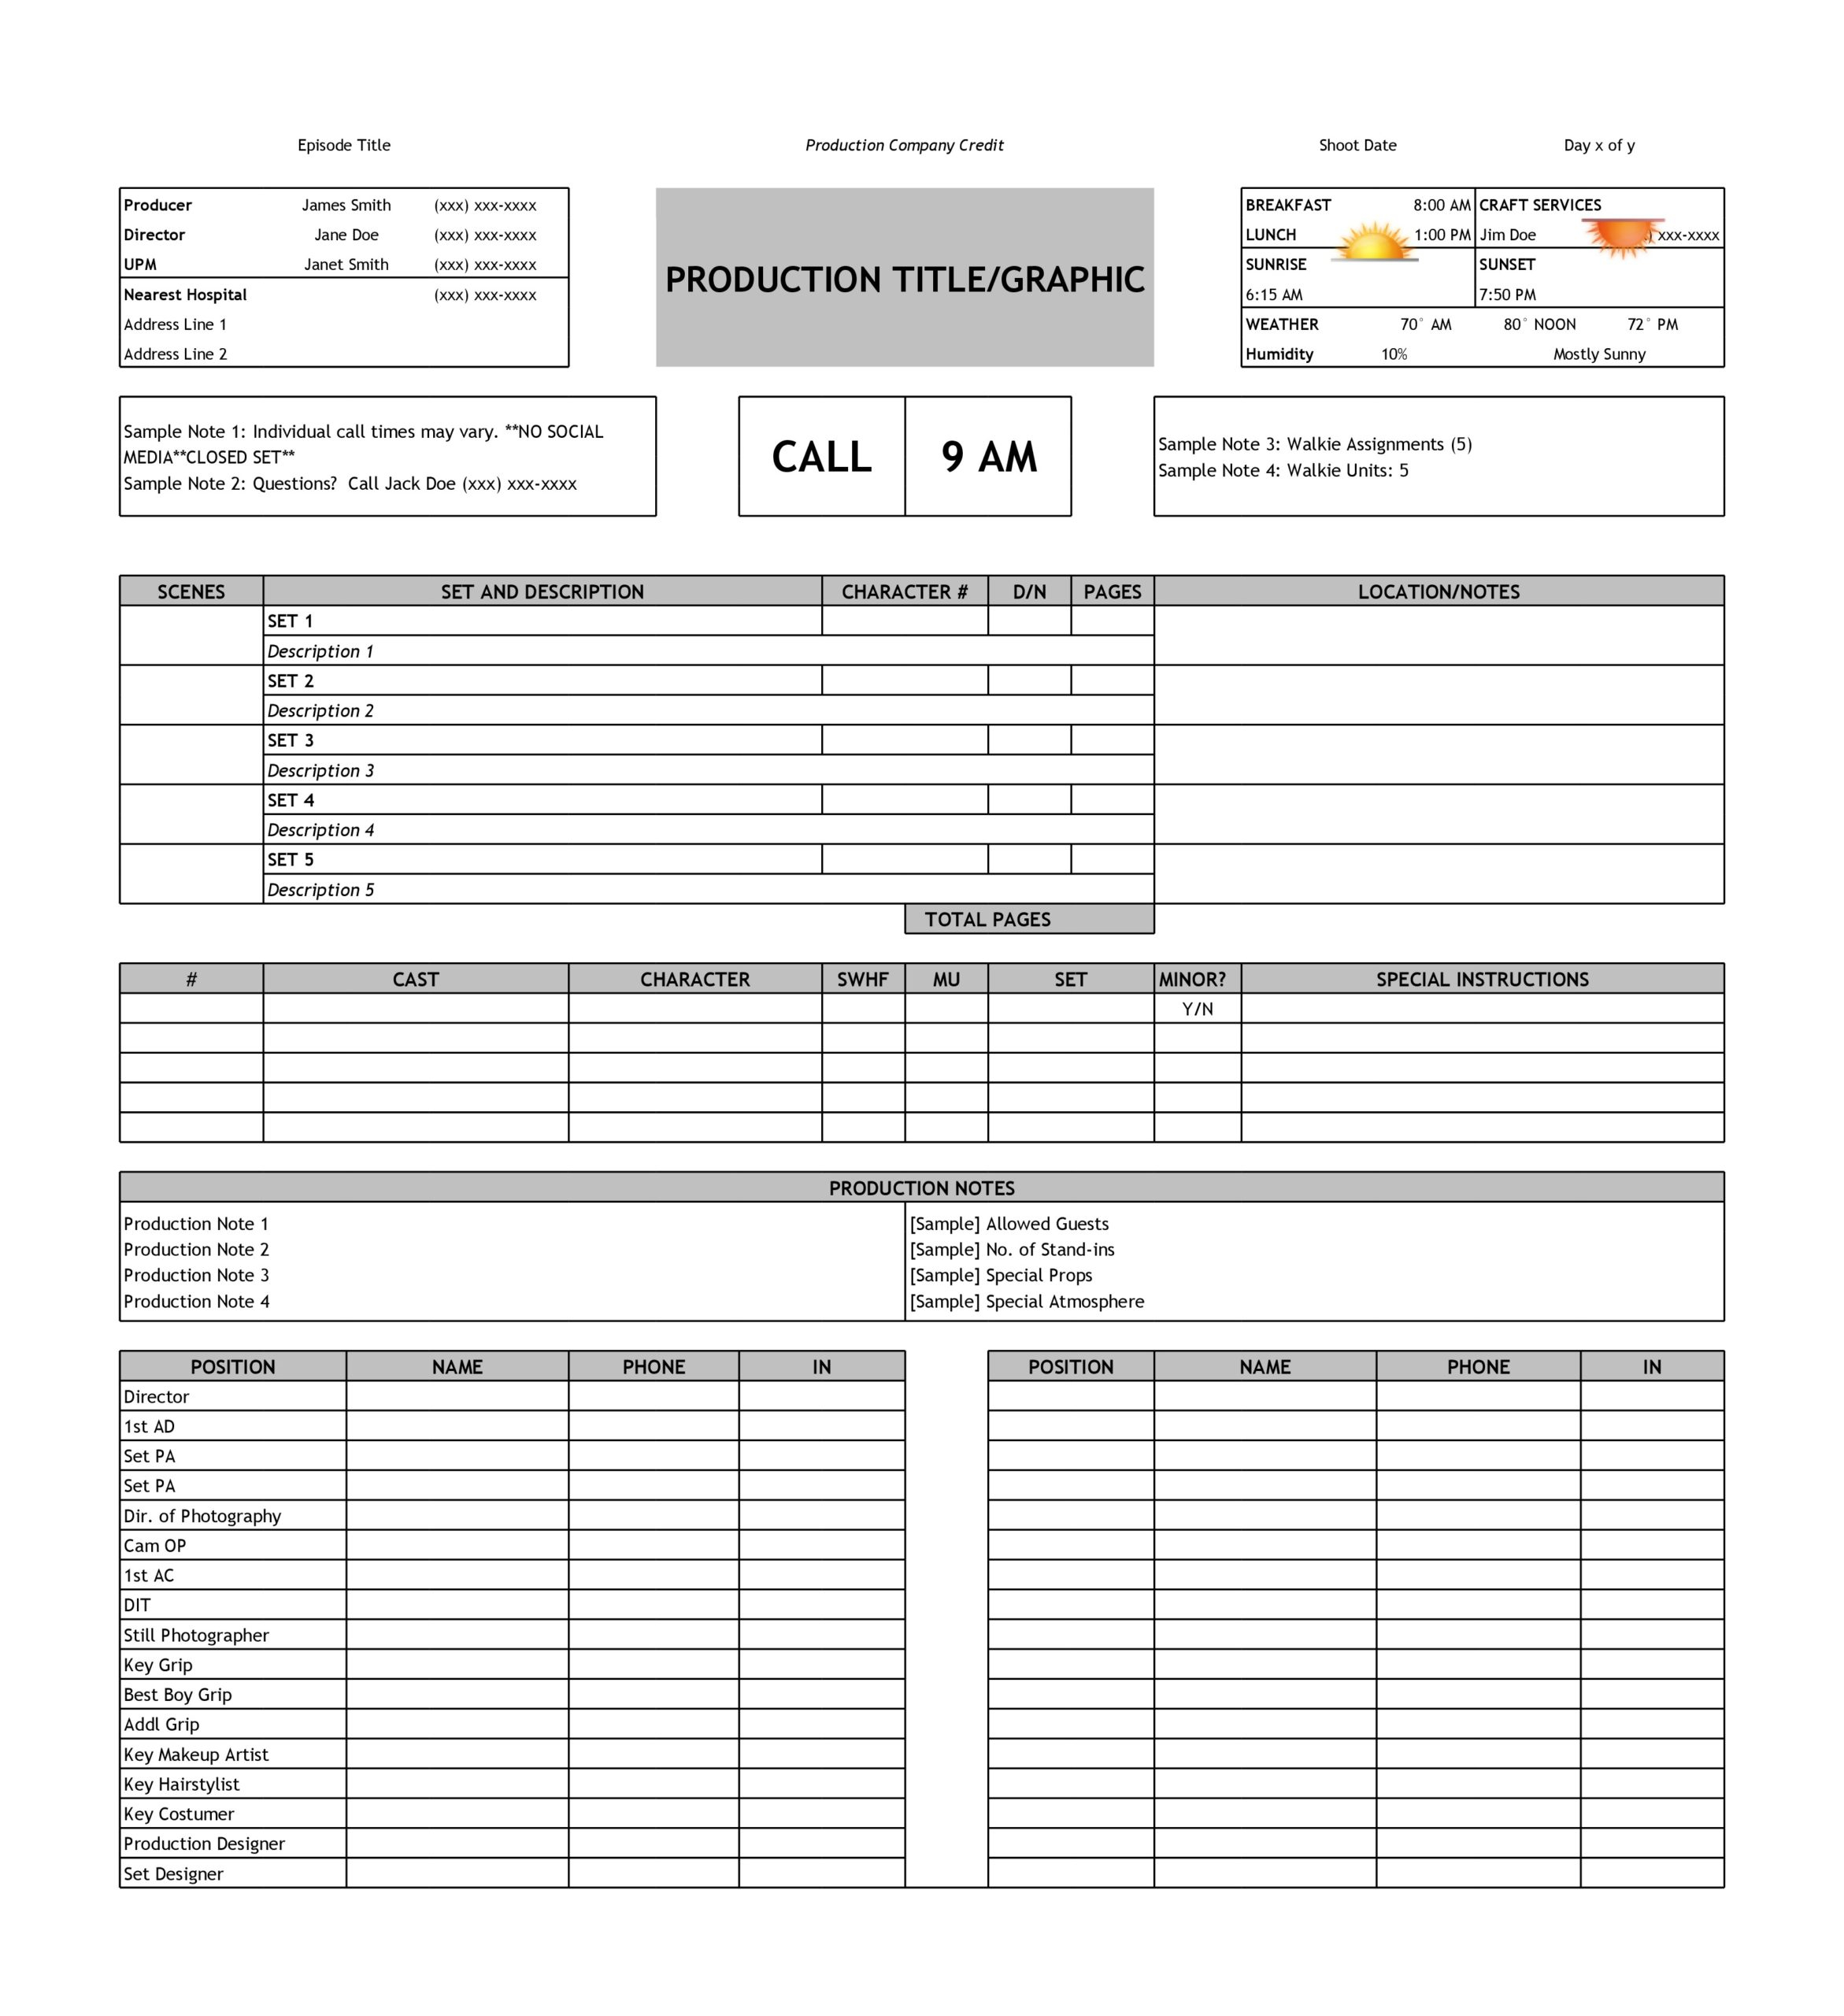 10 Simple Call Sheet Templates (FREE) - TemplateArchive For Blank Call Sheet Template